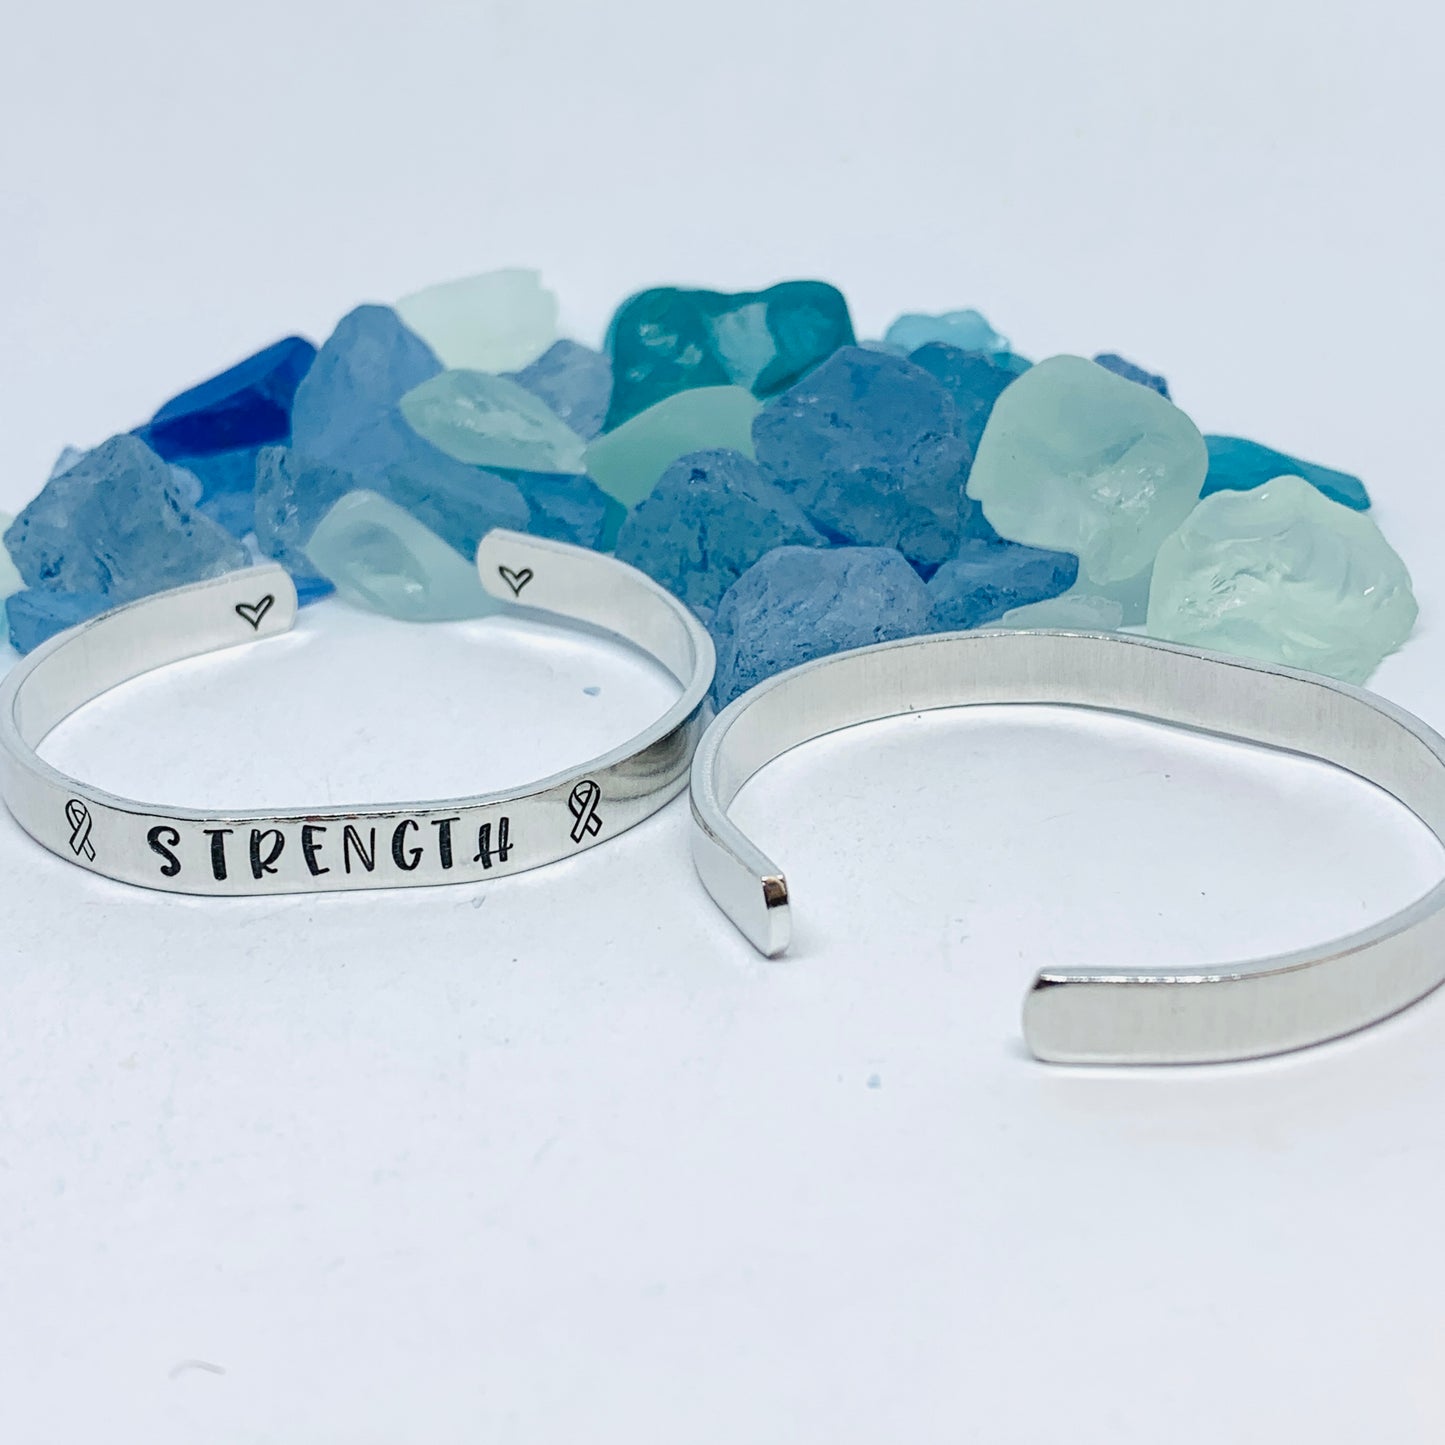 Strength - Hand Stamped Cuff Bracelet | Cancer Awareness | Motivational Jewelry